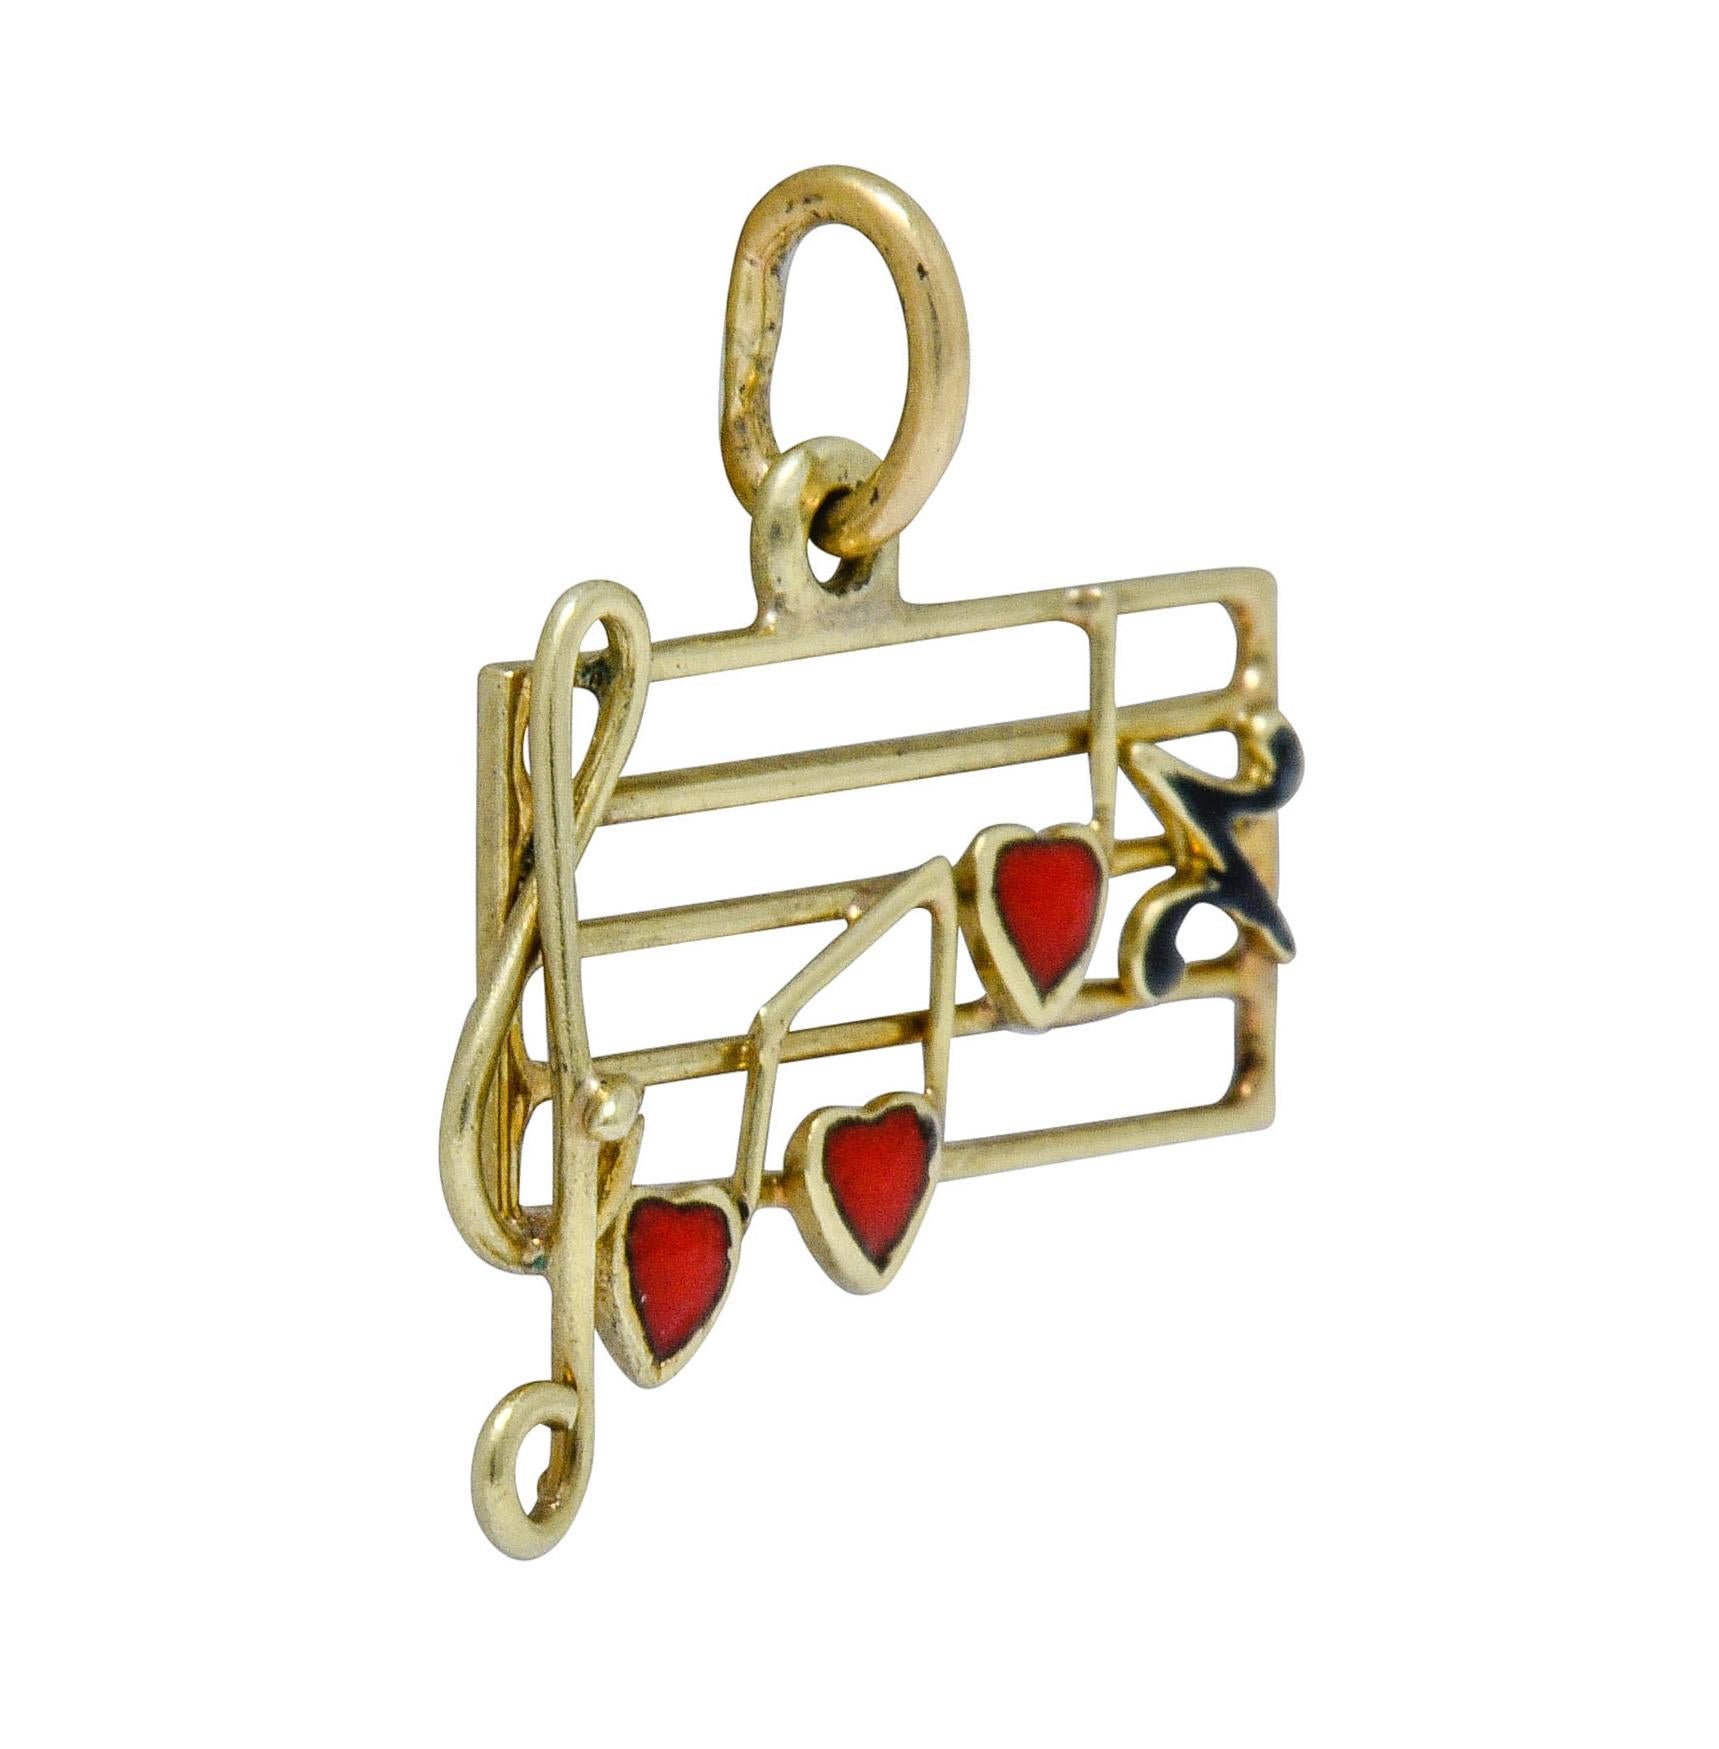 Designed as musical scale made of polished gold horizontal bars

With twisted gold wire G clef followed by a black enamel rest note and musical notes accented with bright red enamel hearts

Measures: 5/8 x 1/2 inch

Total weight: 1.0 grams

Joyful.